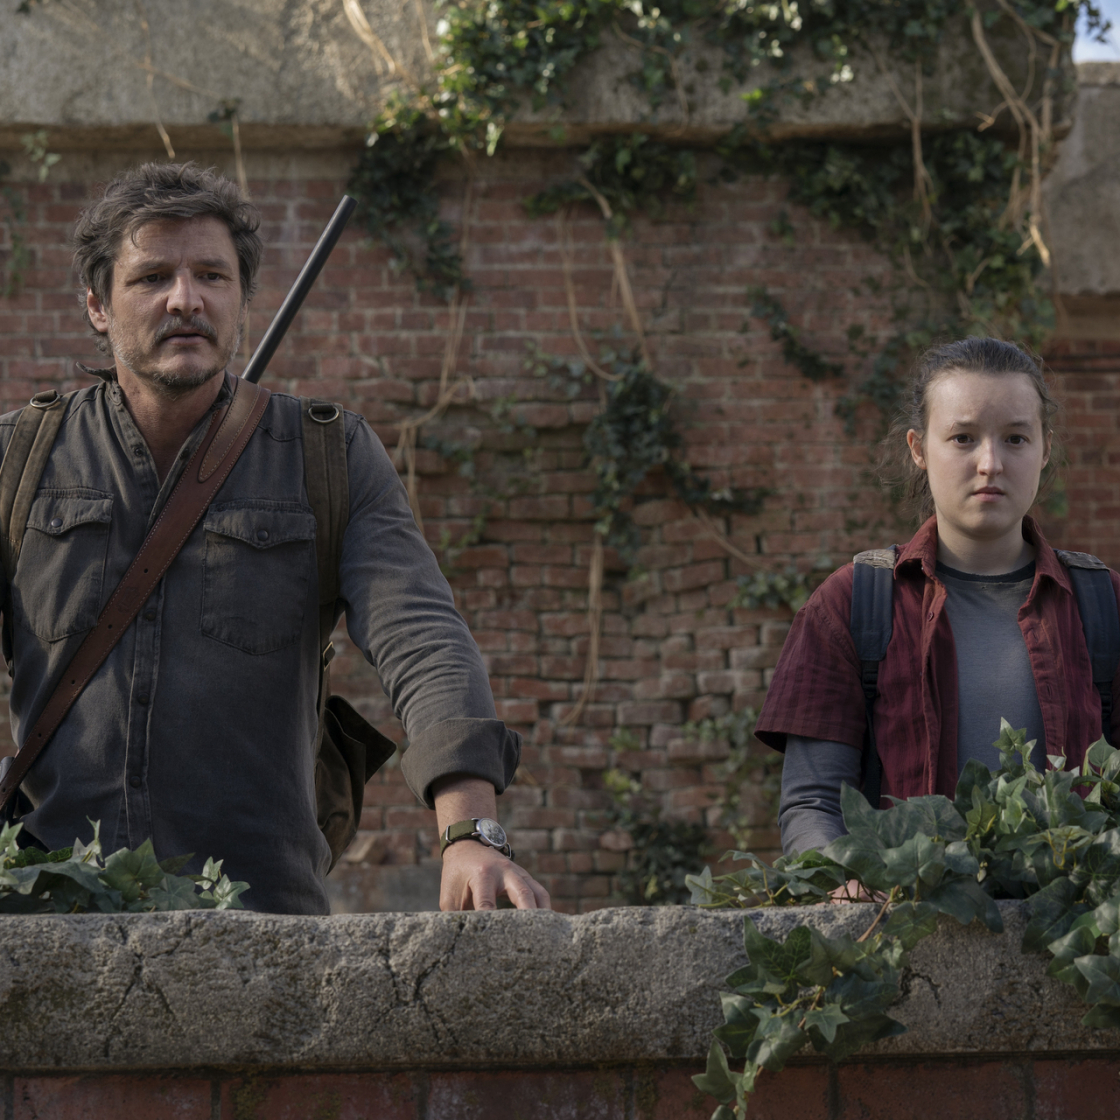 HBO to air bonus episode following The Last of Us finale - Xfire